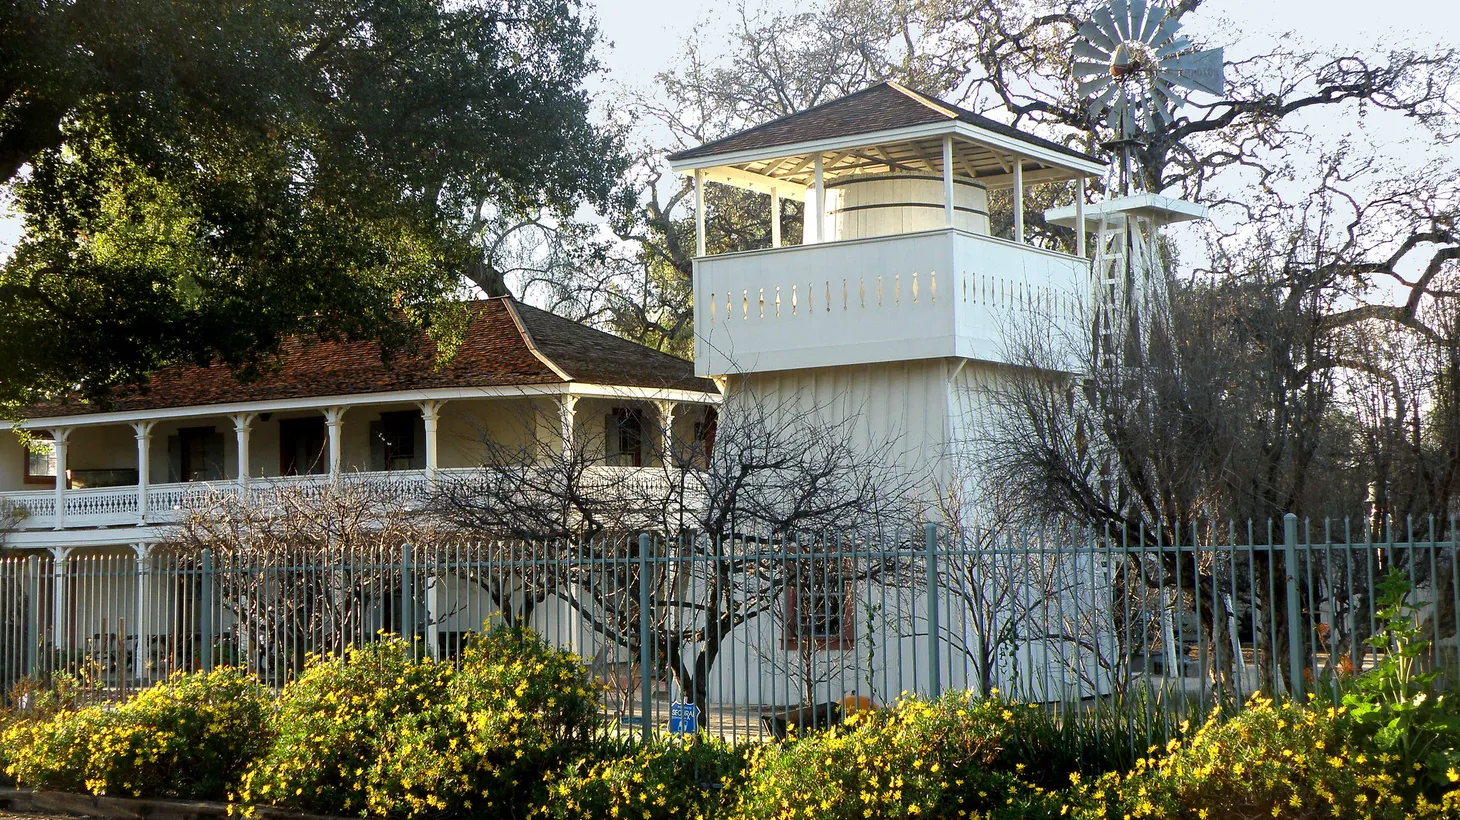 The Leonis Adobe, one of the oldest remaining private homes in Los Angeles, became the city’s first cultural monument, designated by the Cultural Heritage Commission in 1962.